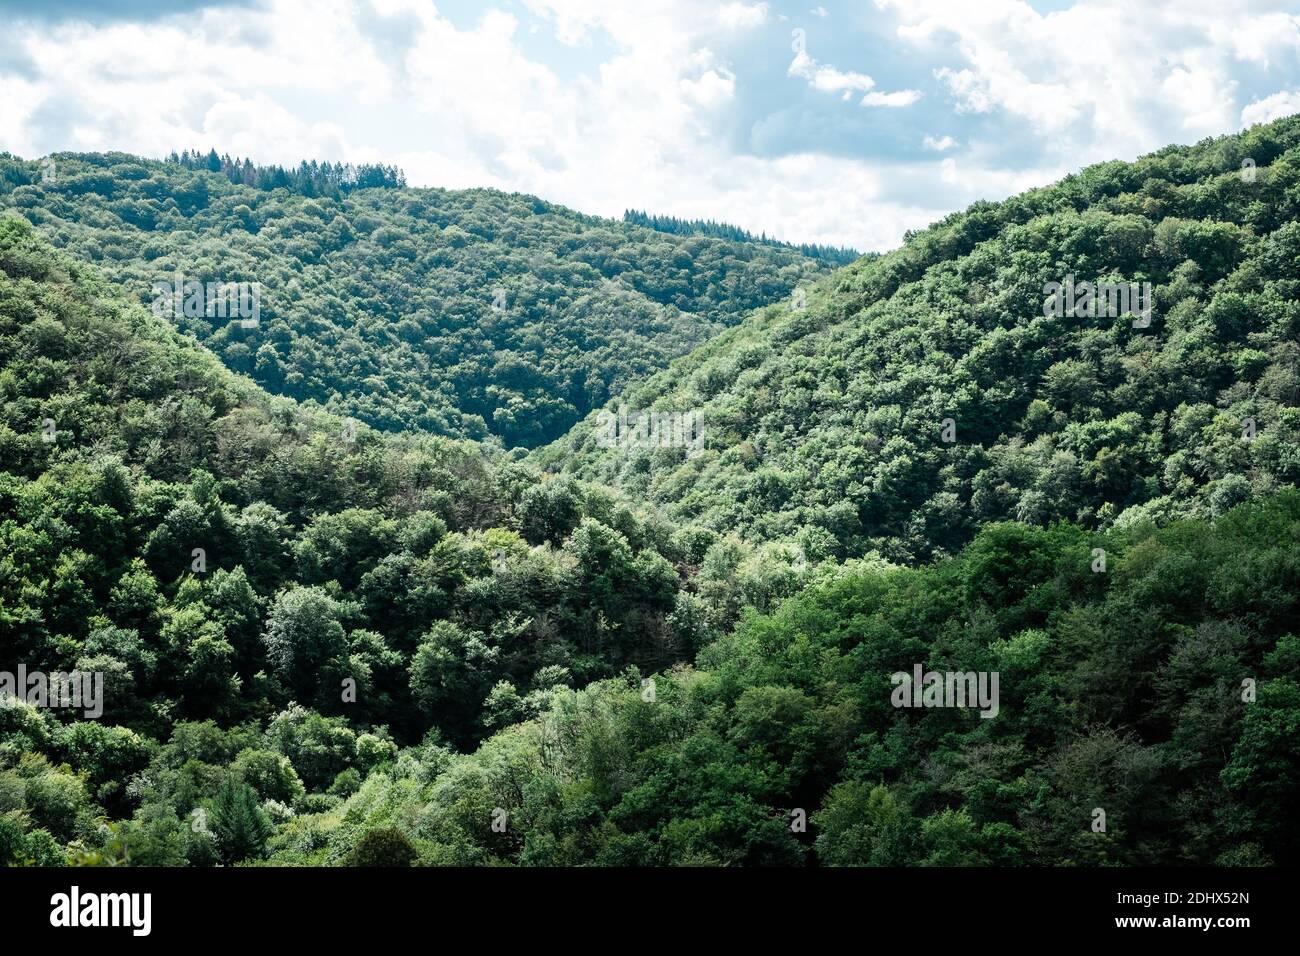 A forest of green trees ion hills in Corrèze, France. Stock Photo